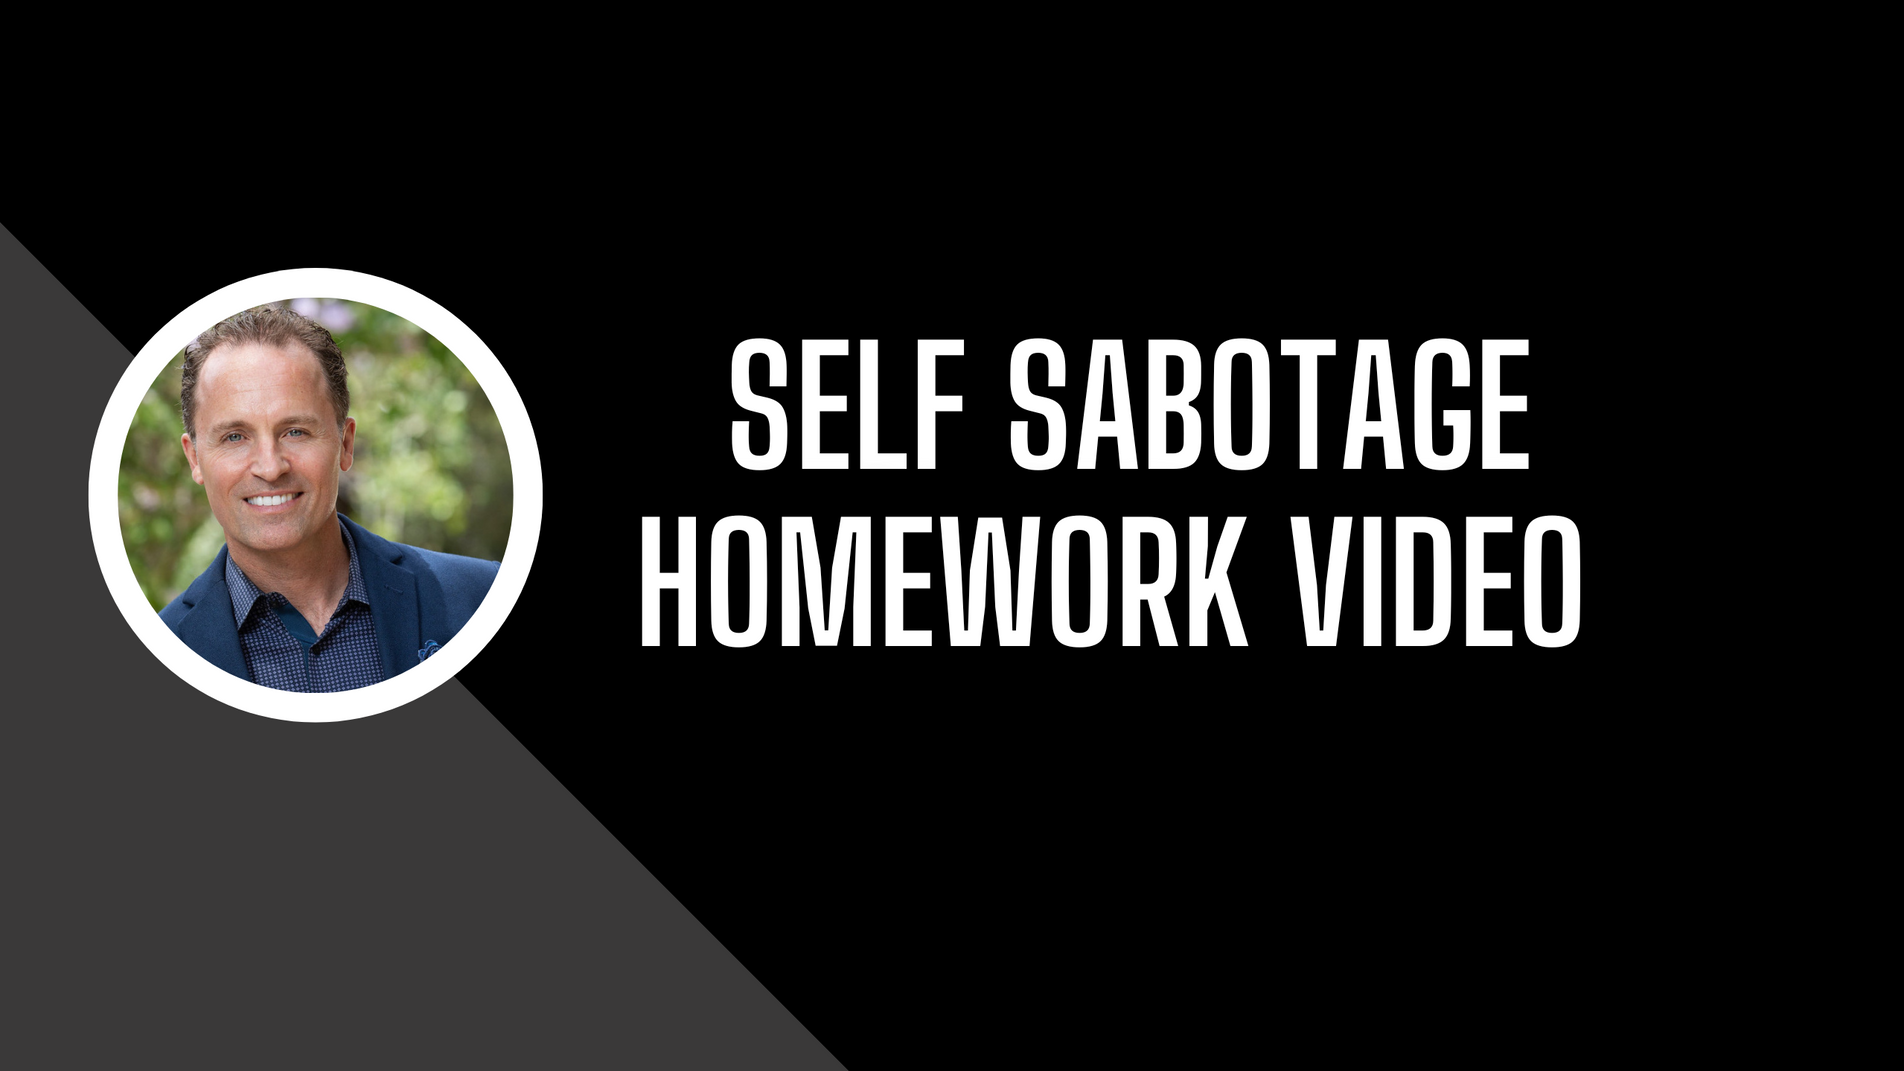 Introduction to Self Sabotage